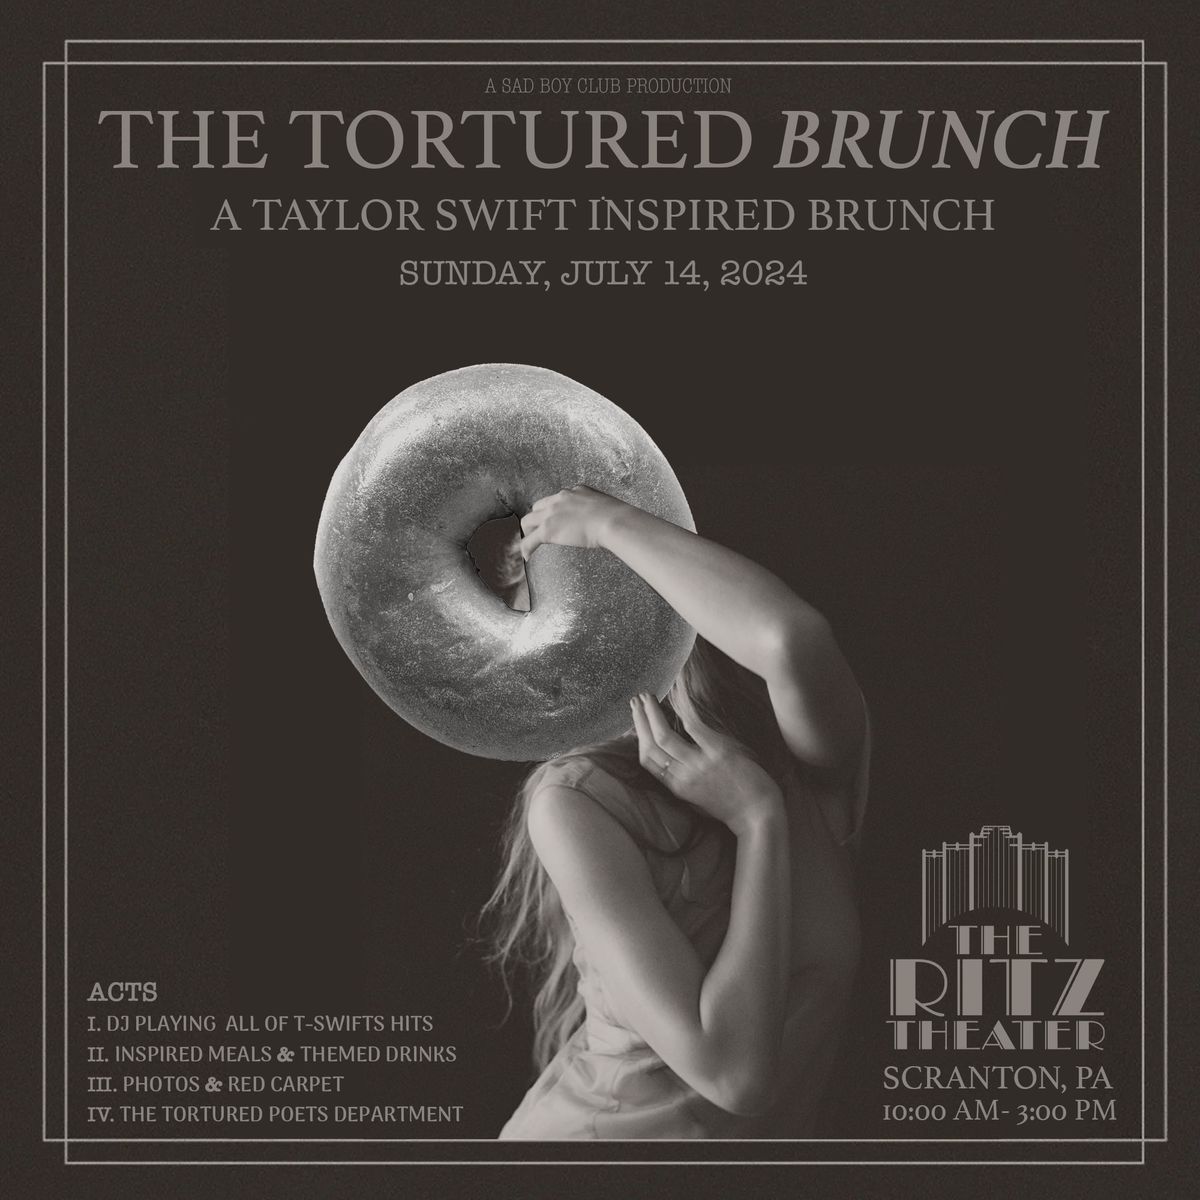 The Tortured Brunch - T-Swift Inspired Brunch at The Ritz Theater